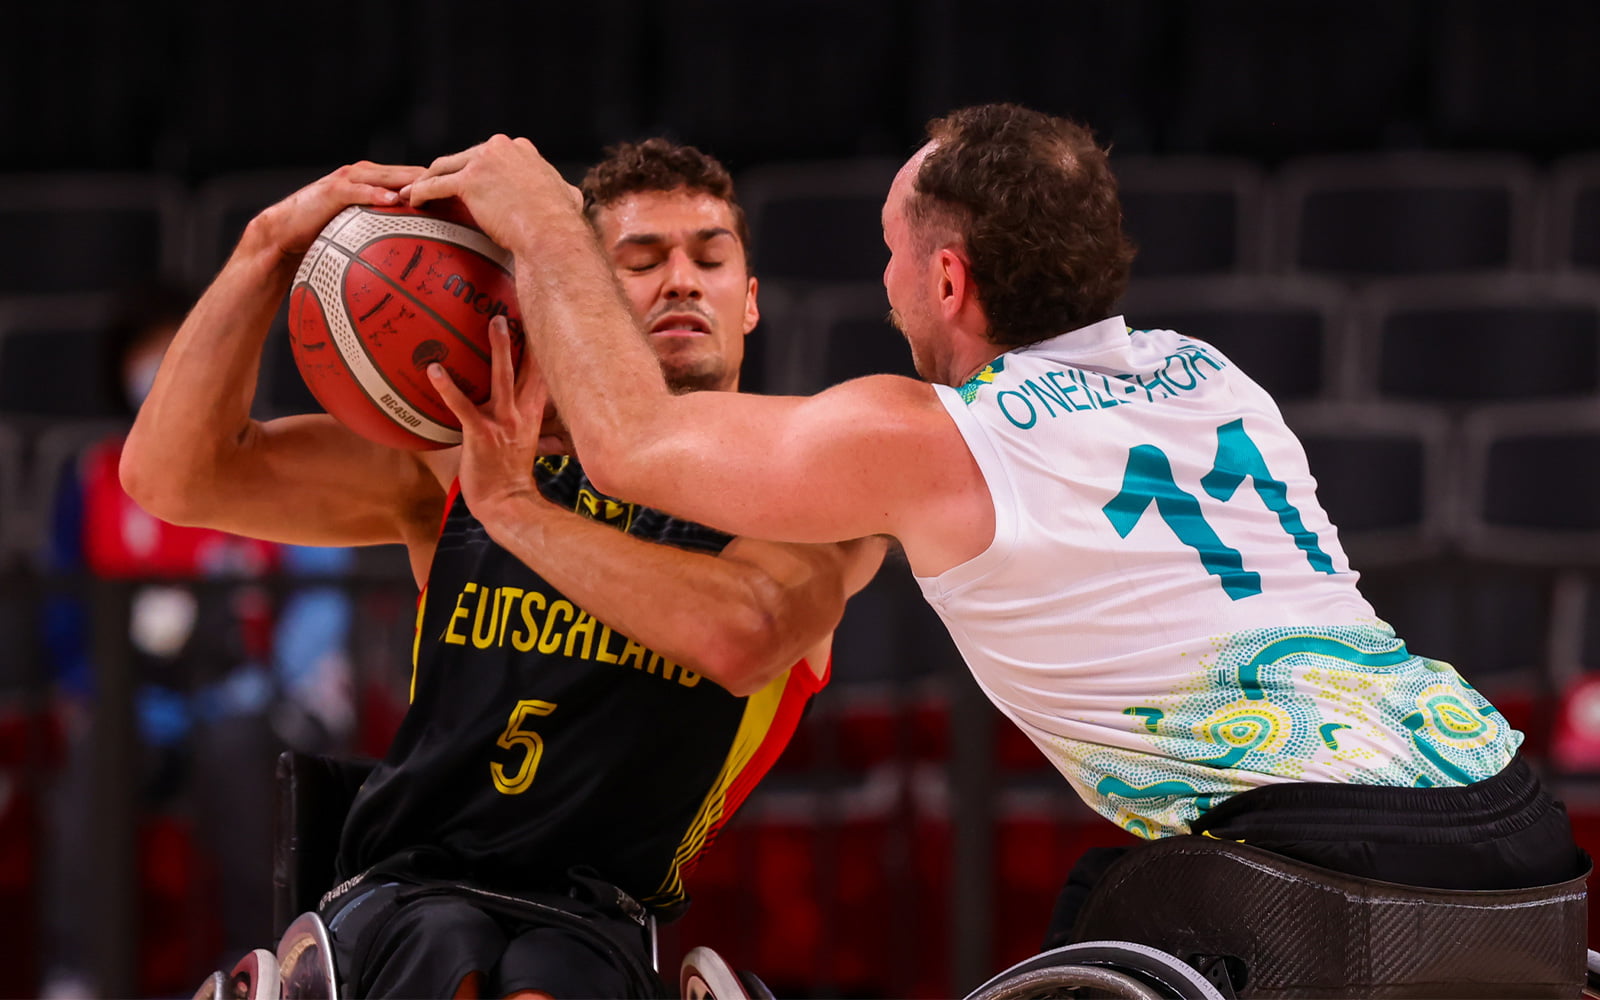 Two male Wheelchair basketball players wrestling over a ball